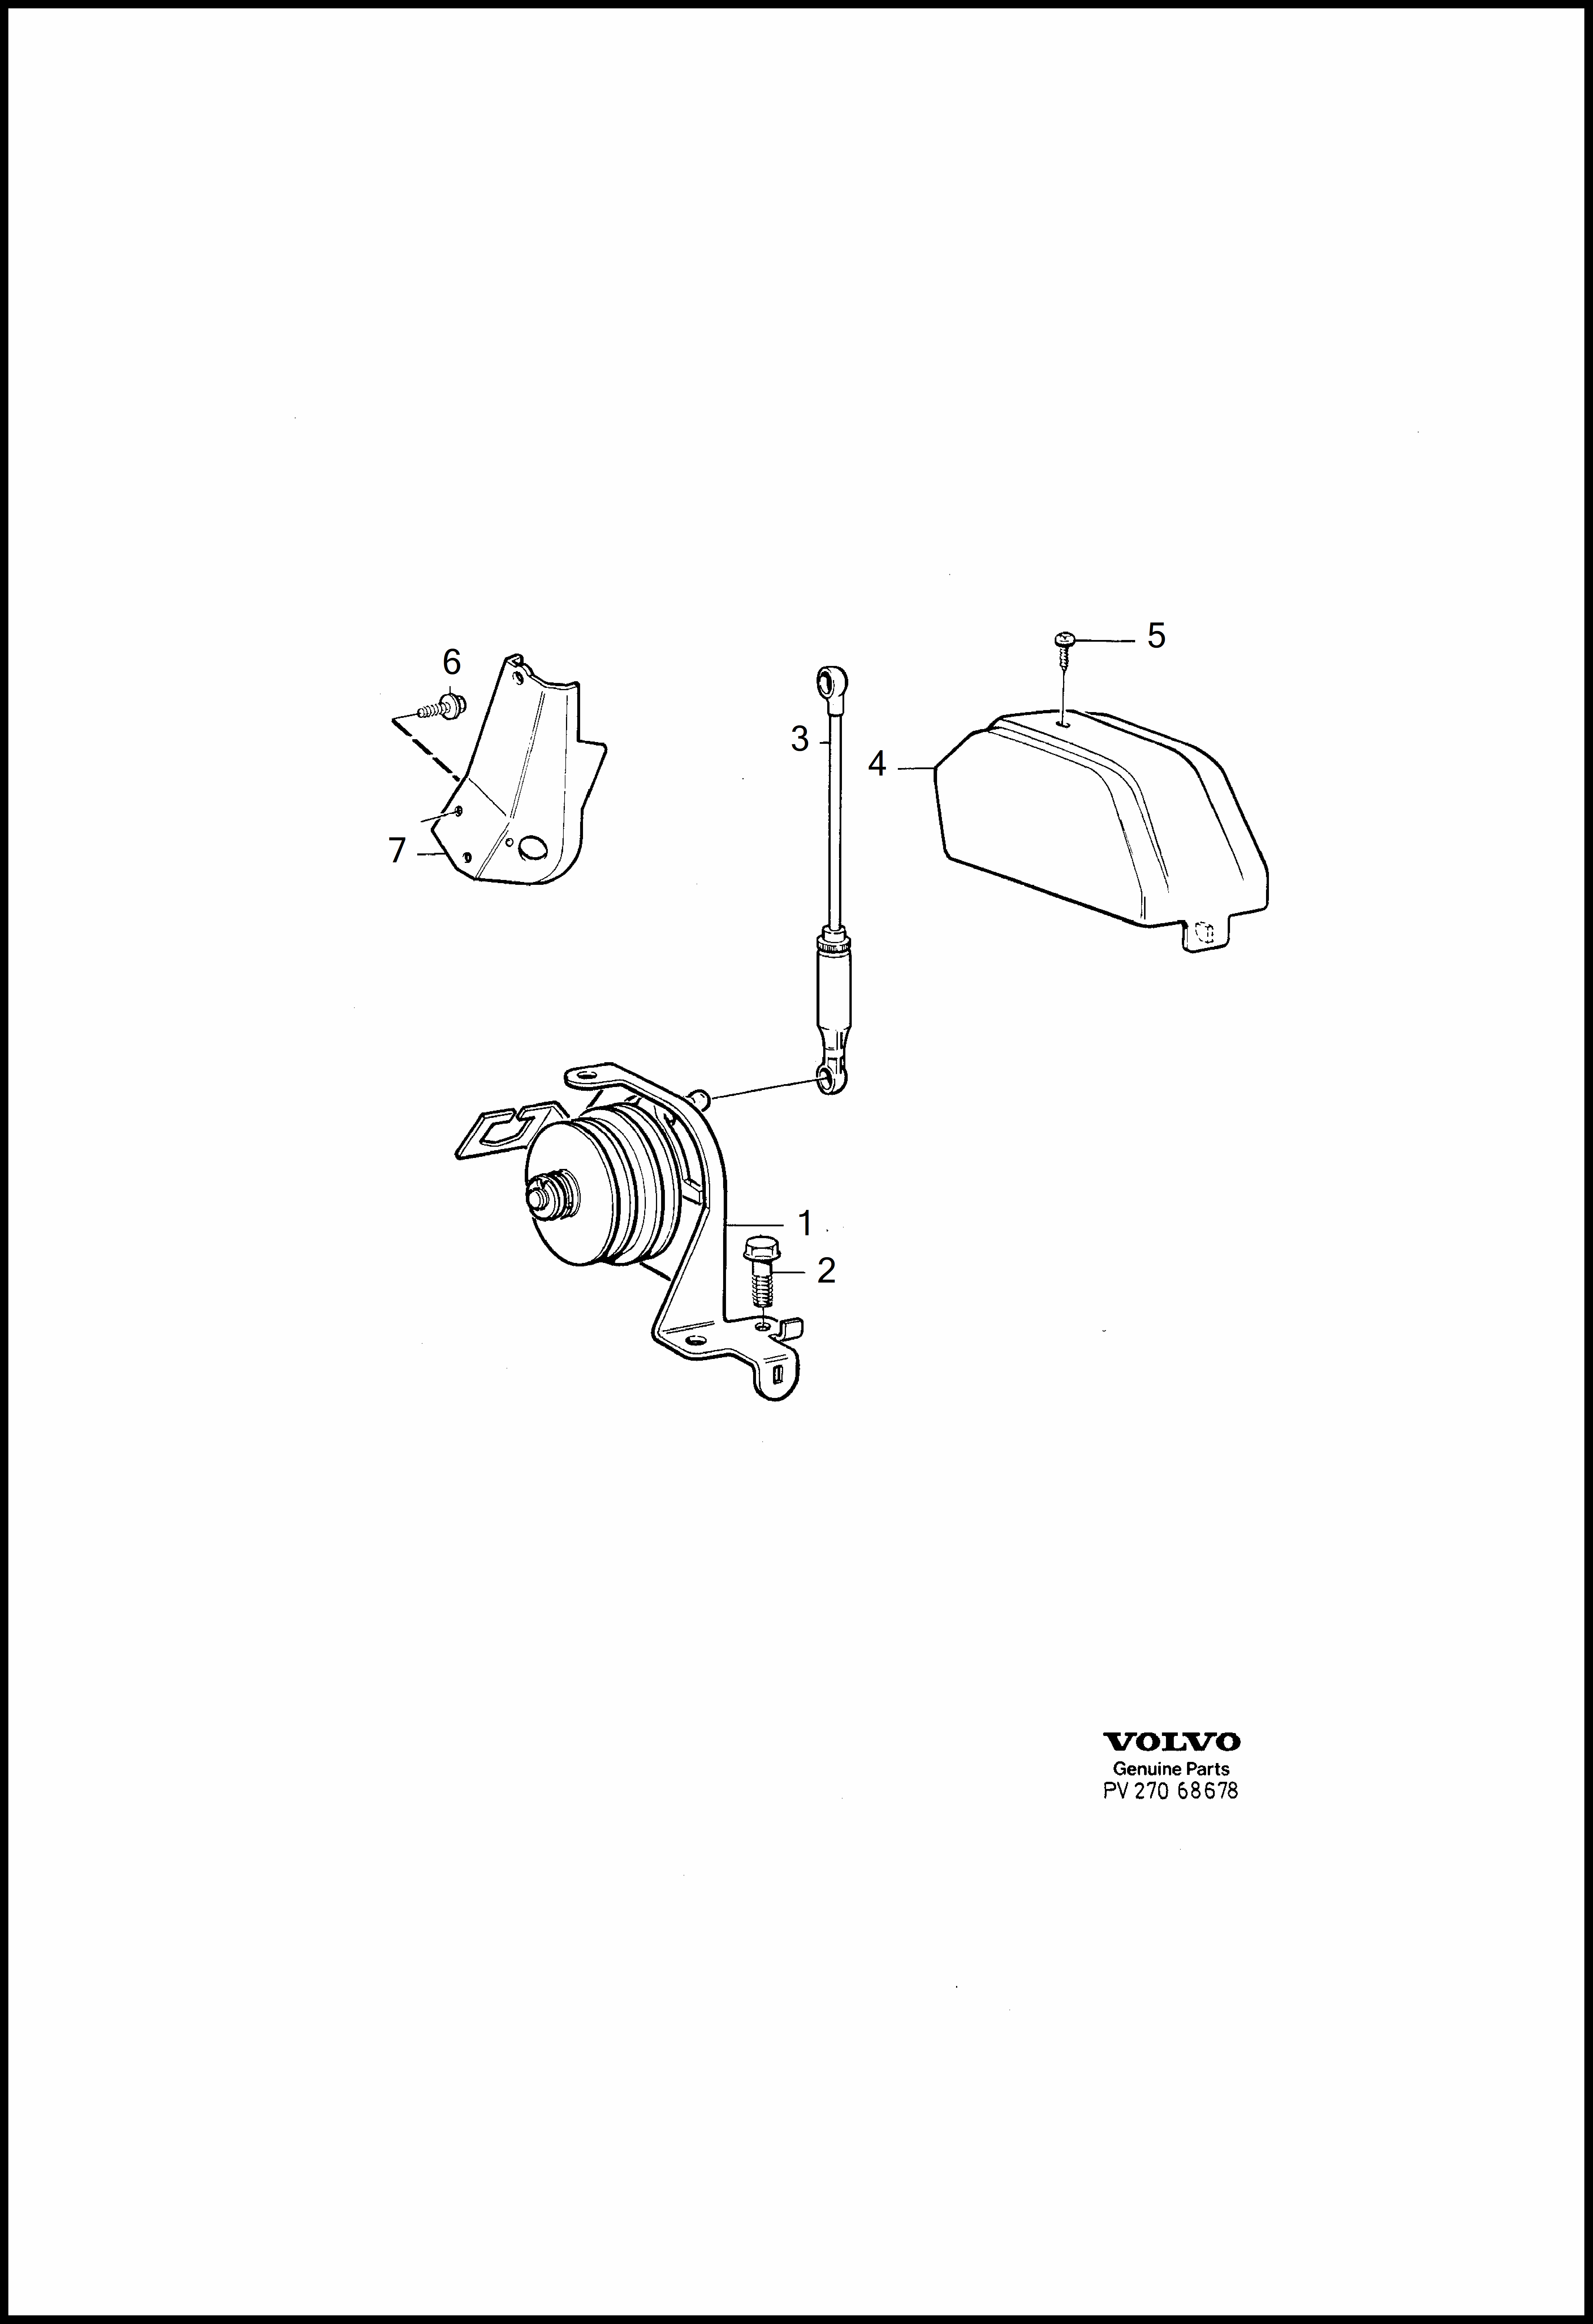 control pulley with fittings pour Volvo 960 960